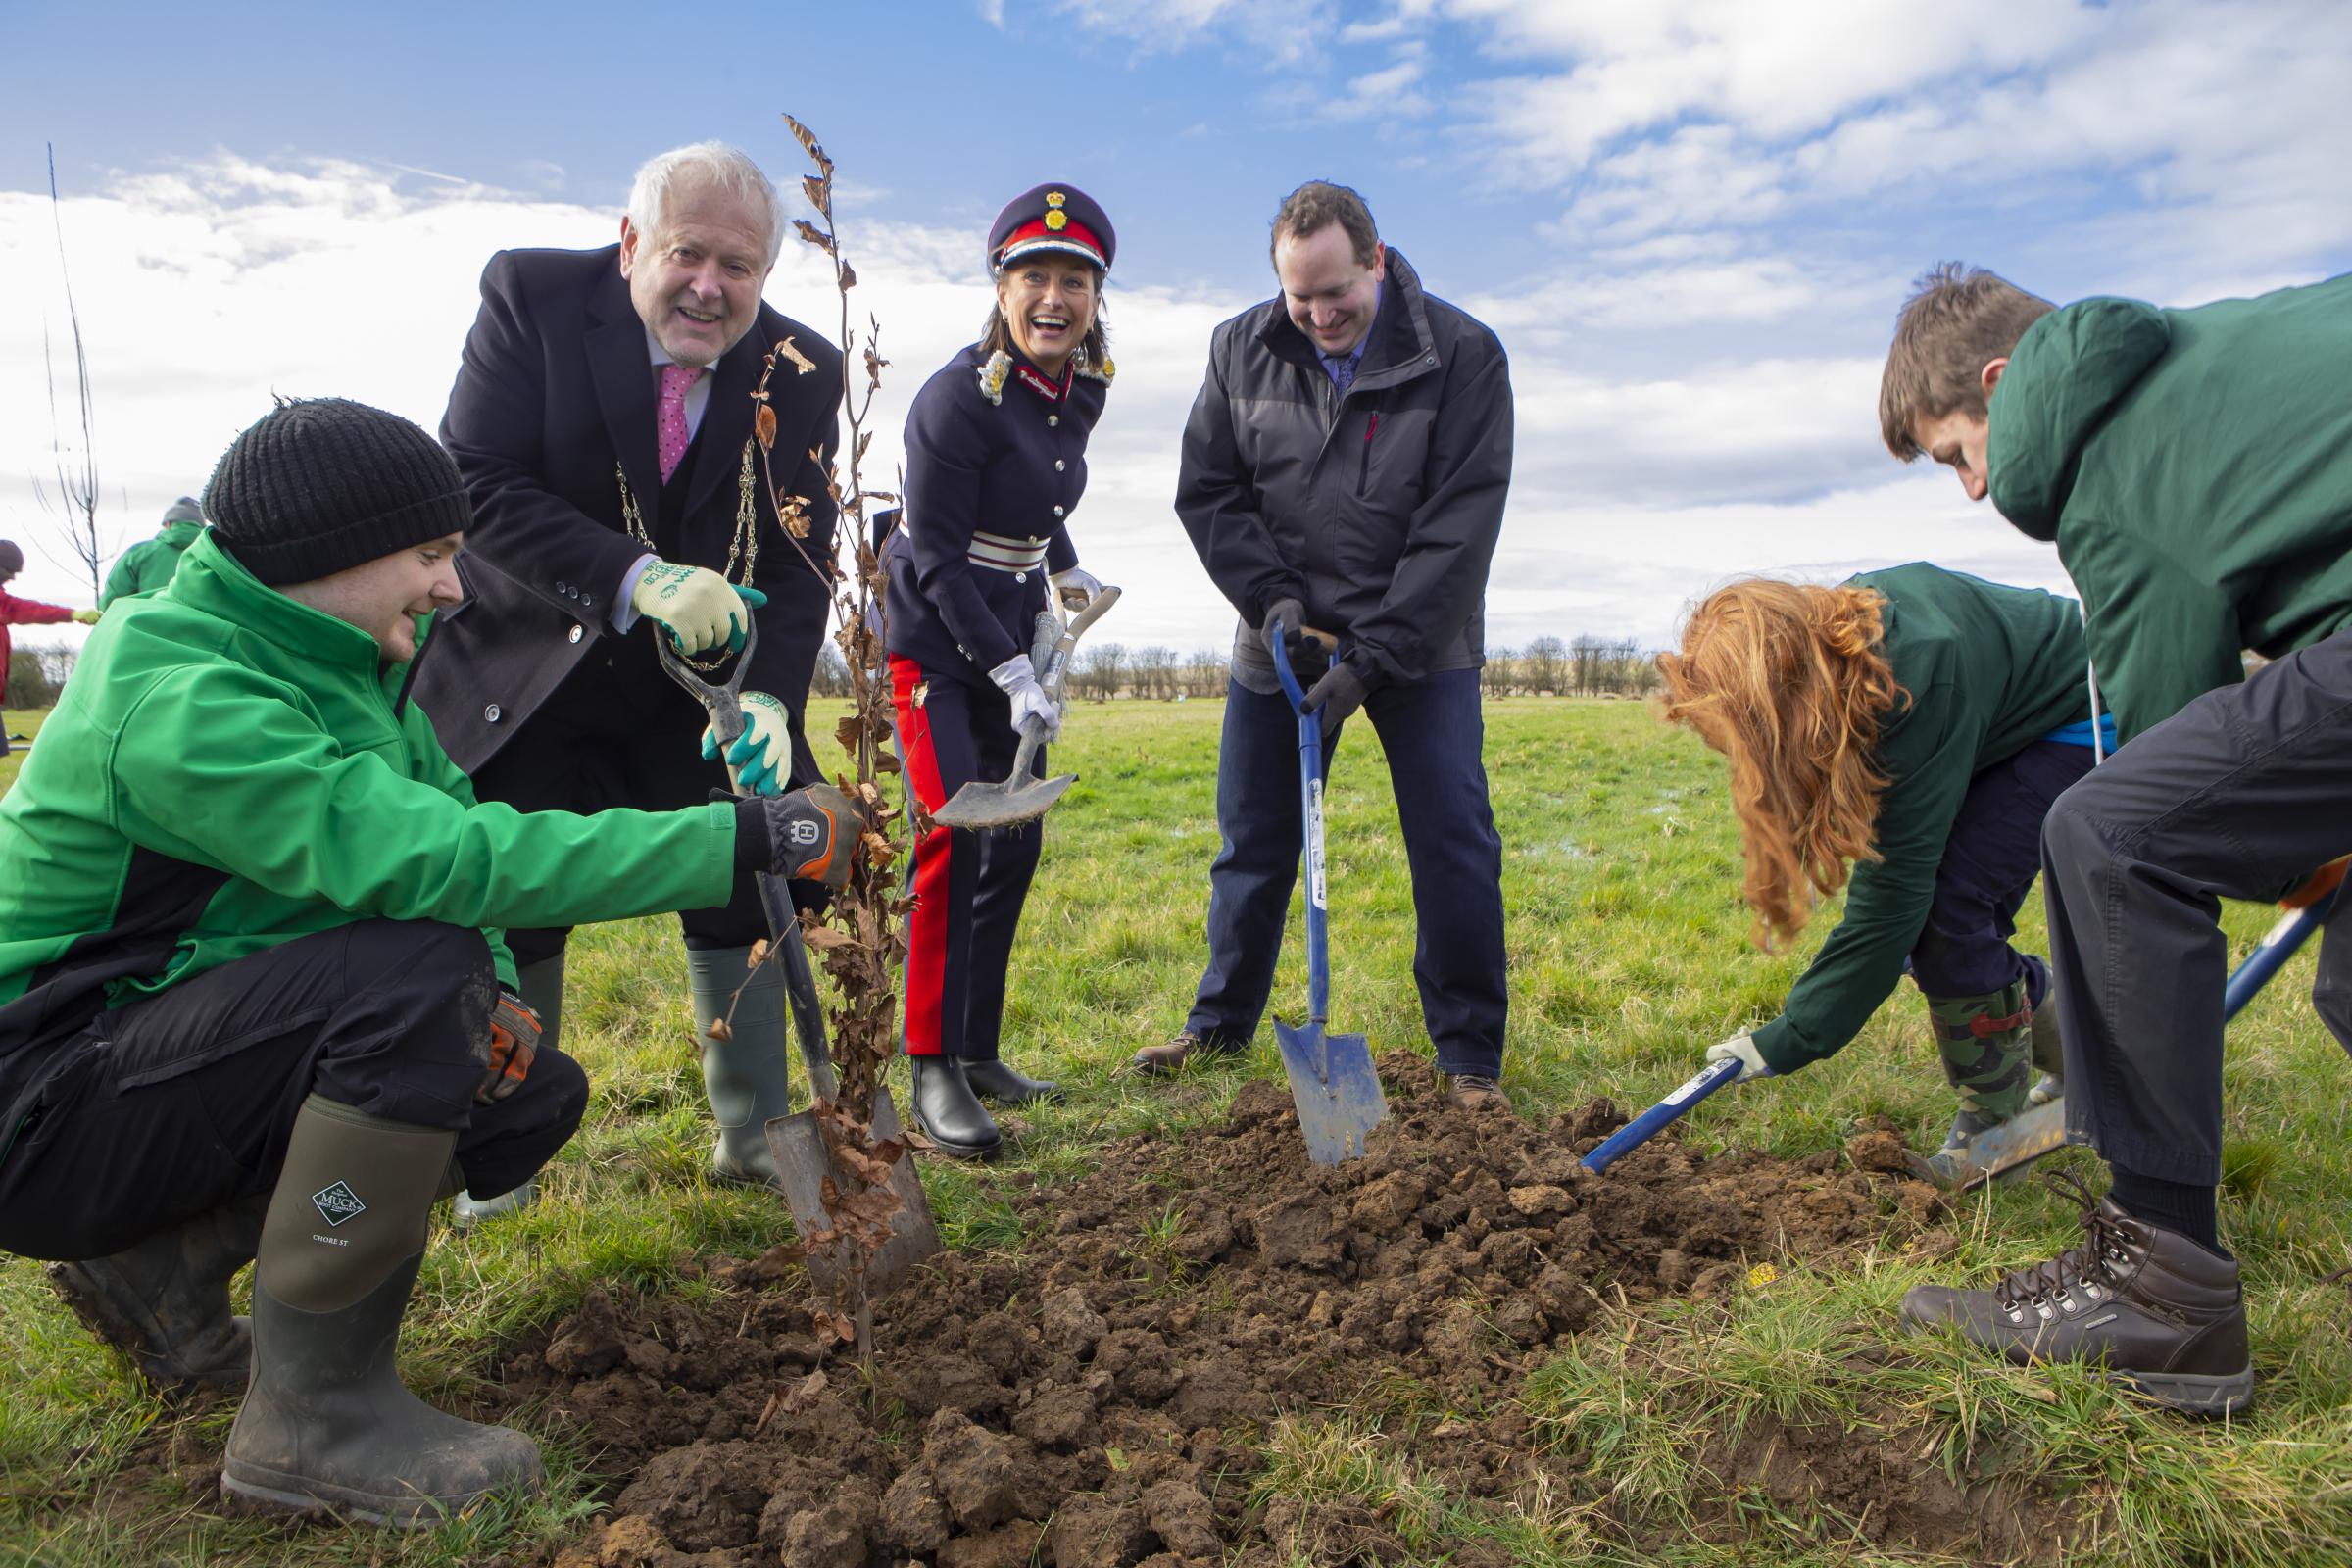 York celebrated as Champion City with Jubilee tree planting